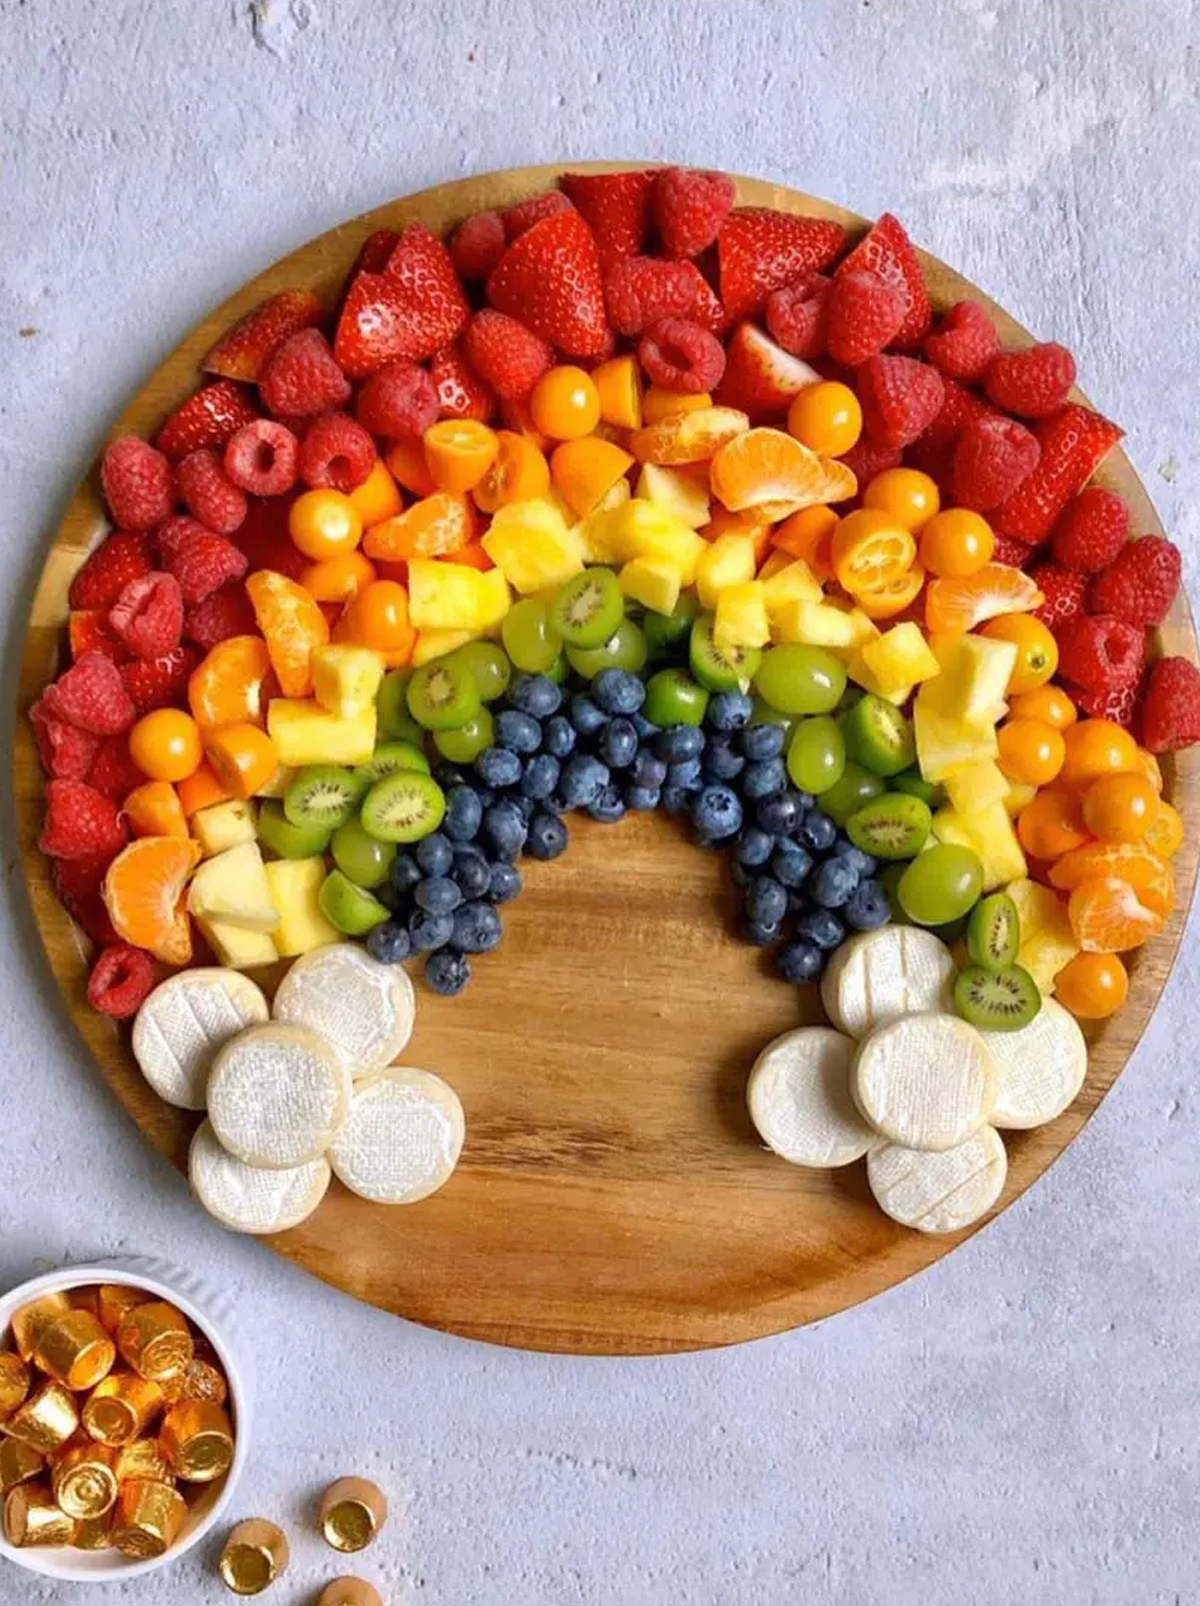 One of the easiest rainbow charcuterie board ideas with colorful fruit and brie cheese as clouds from aint too proud to meg.